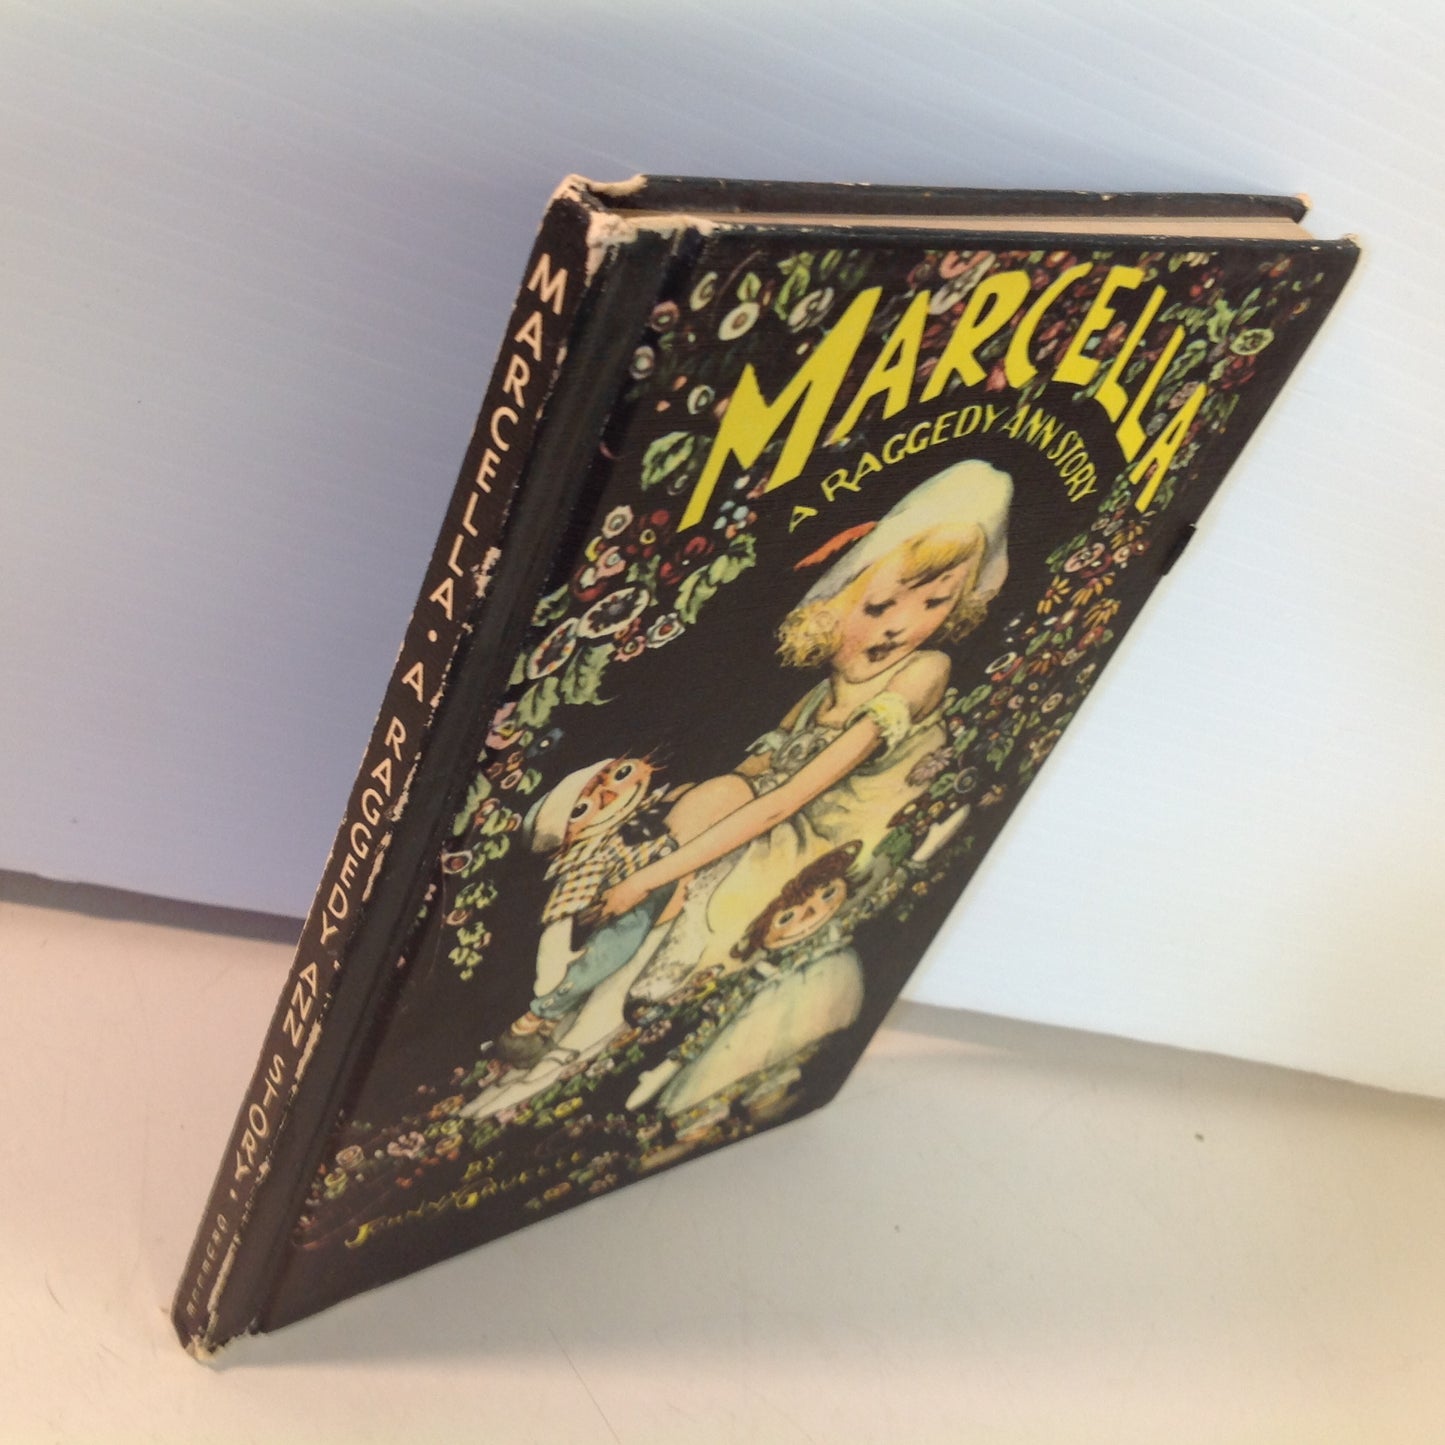 Vintage 1960 M A Donohue Hardcover Book Marcella, A Raggedy Ann Story by Johnny Gruelle